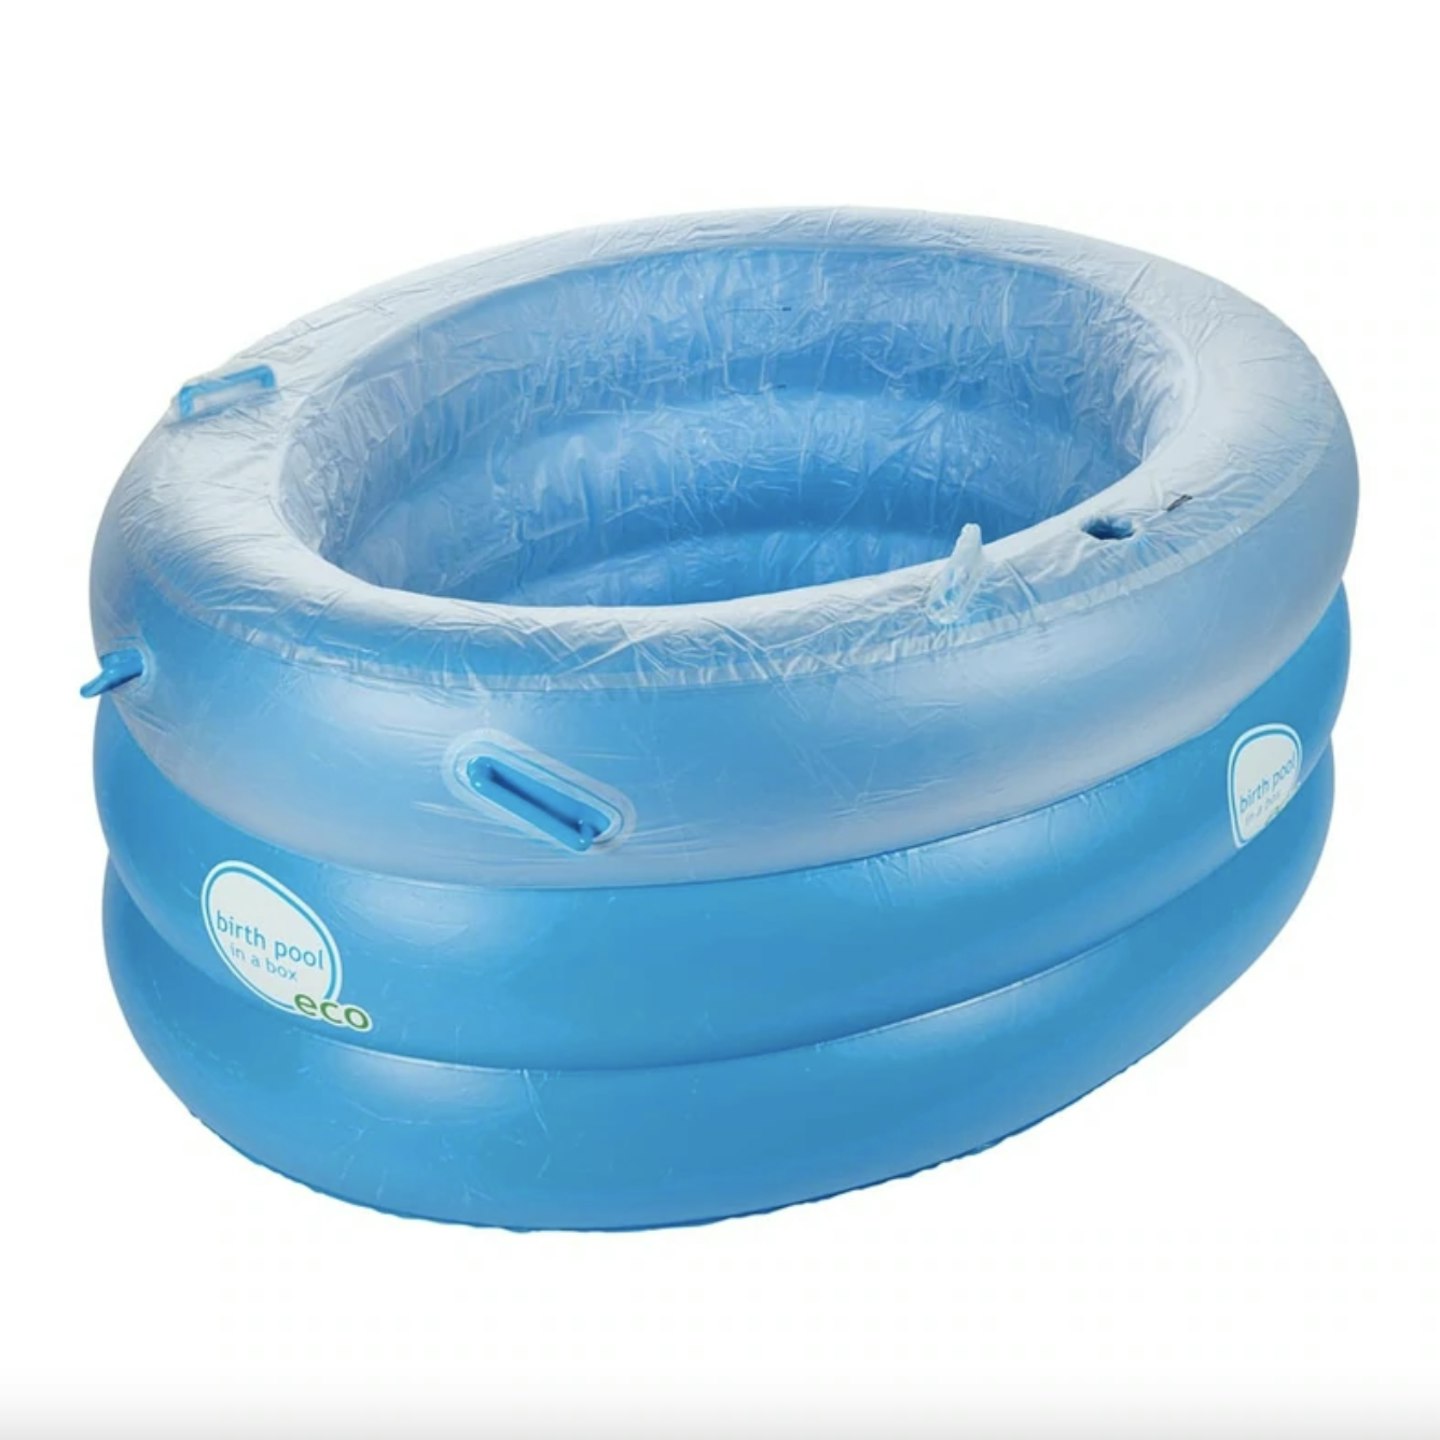 Birth Pool in a Box Personal Pool with Liner